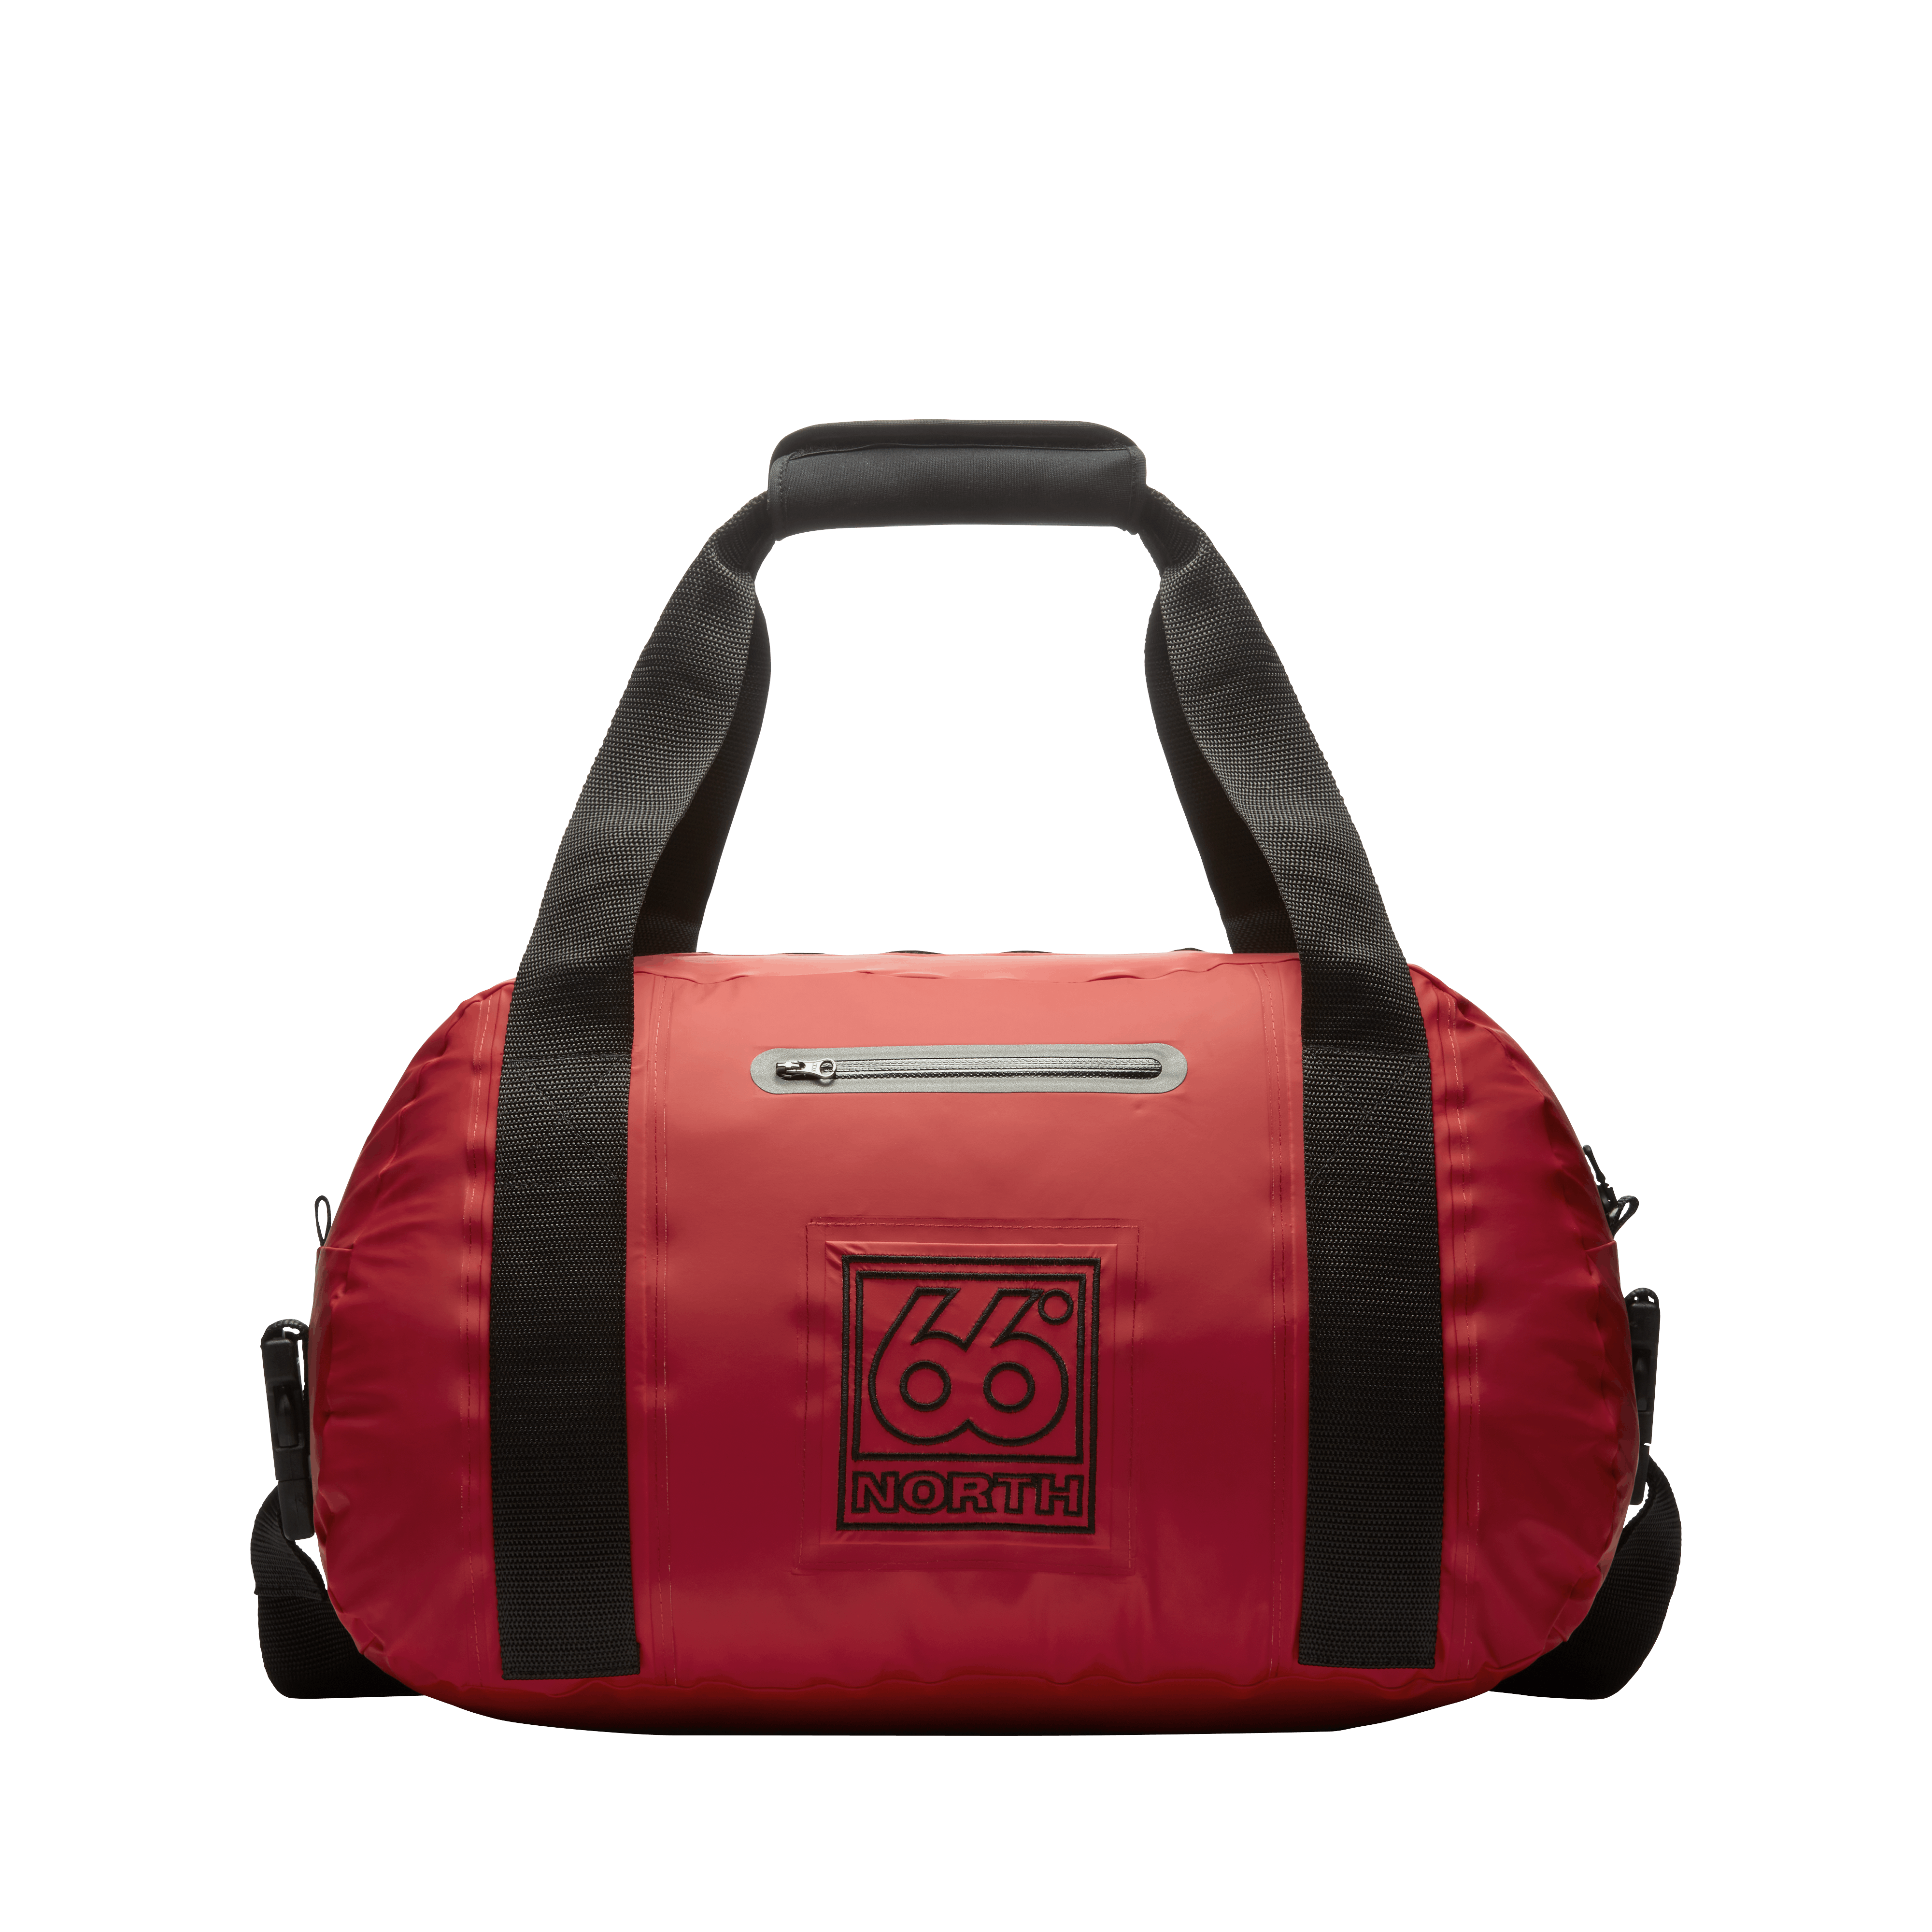 66 North Womens Sports Bag Accessories - Red - One Size